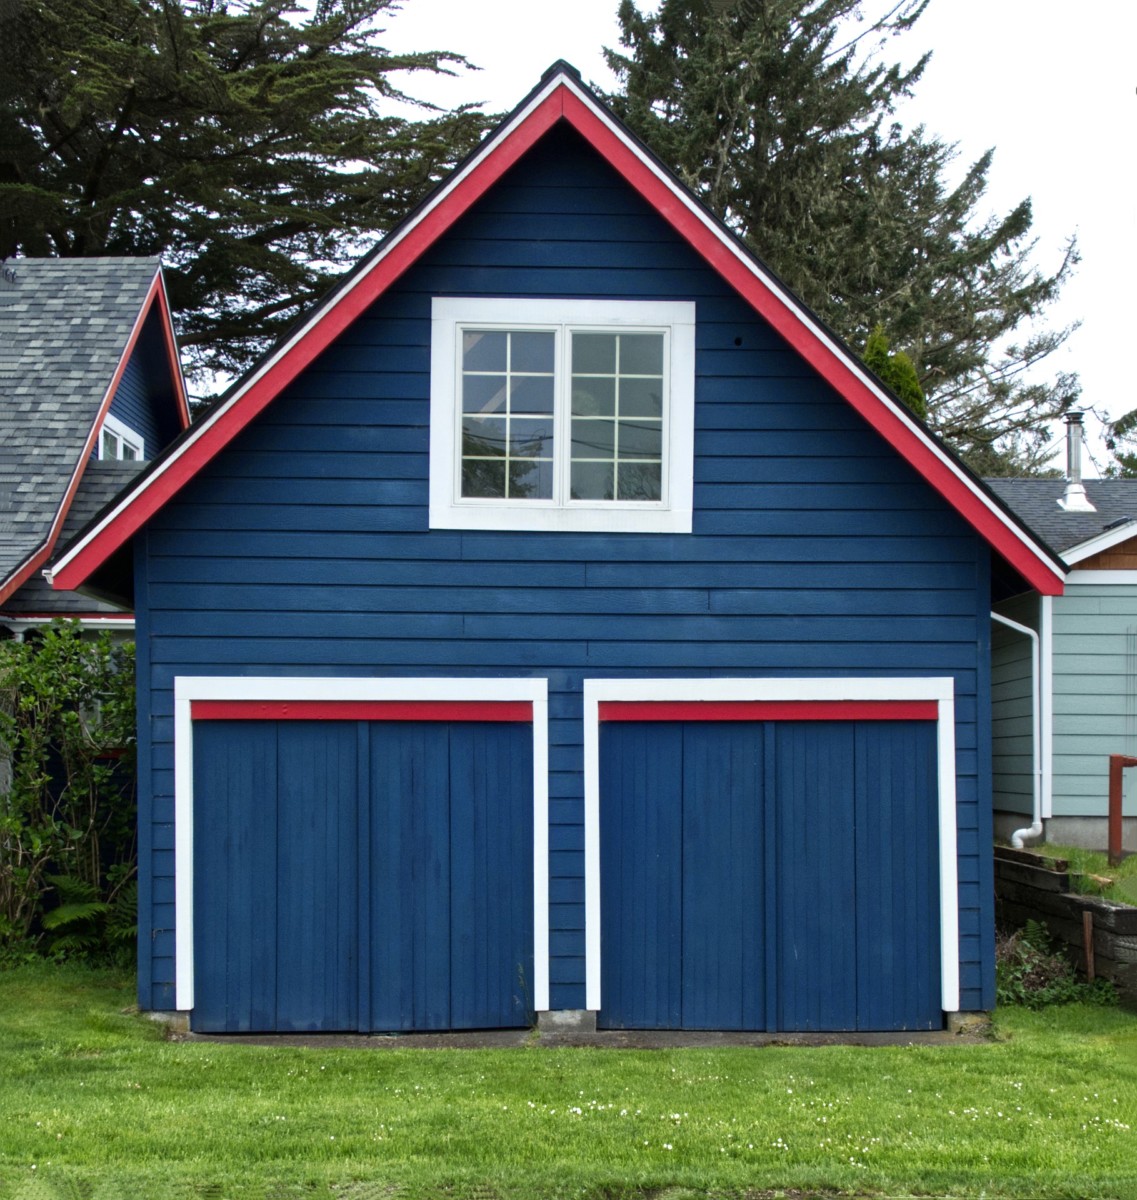 Old blue and red carriage house